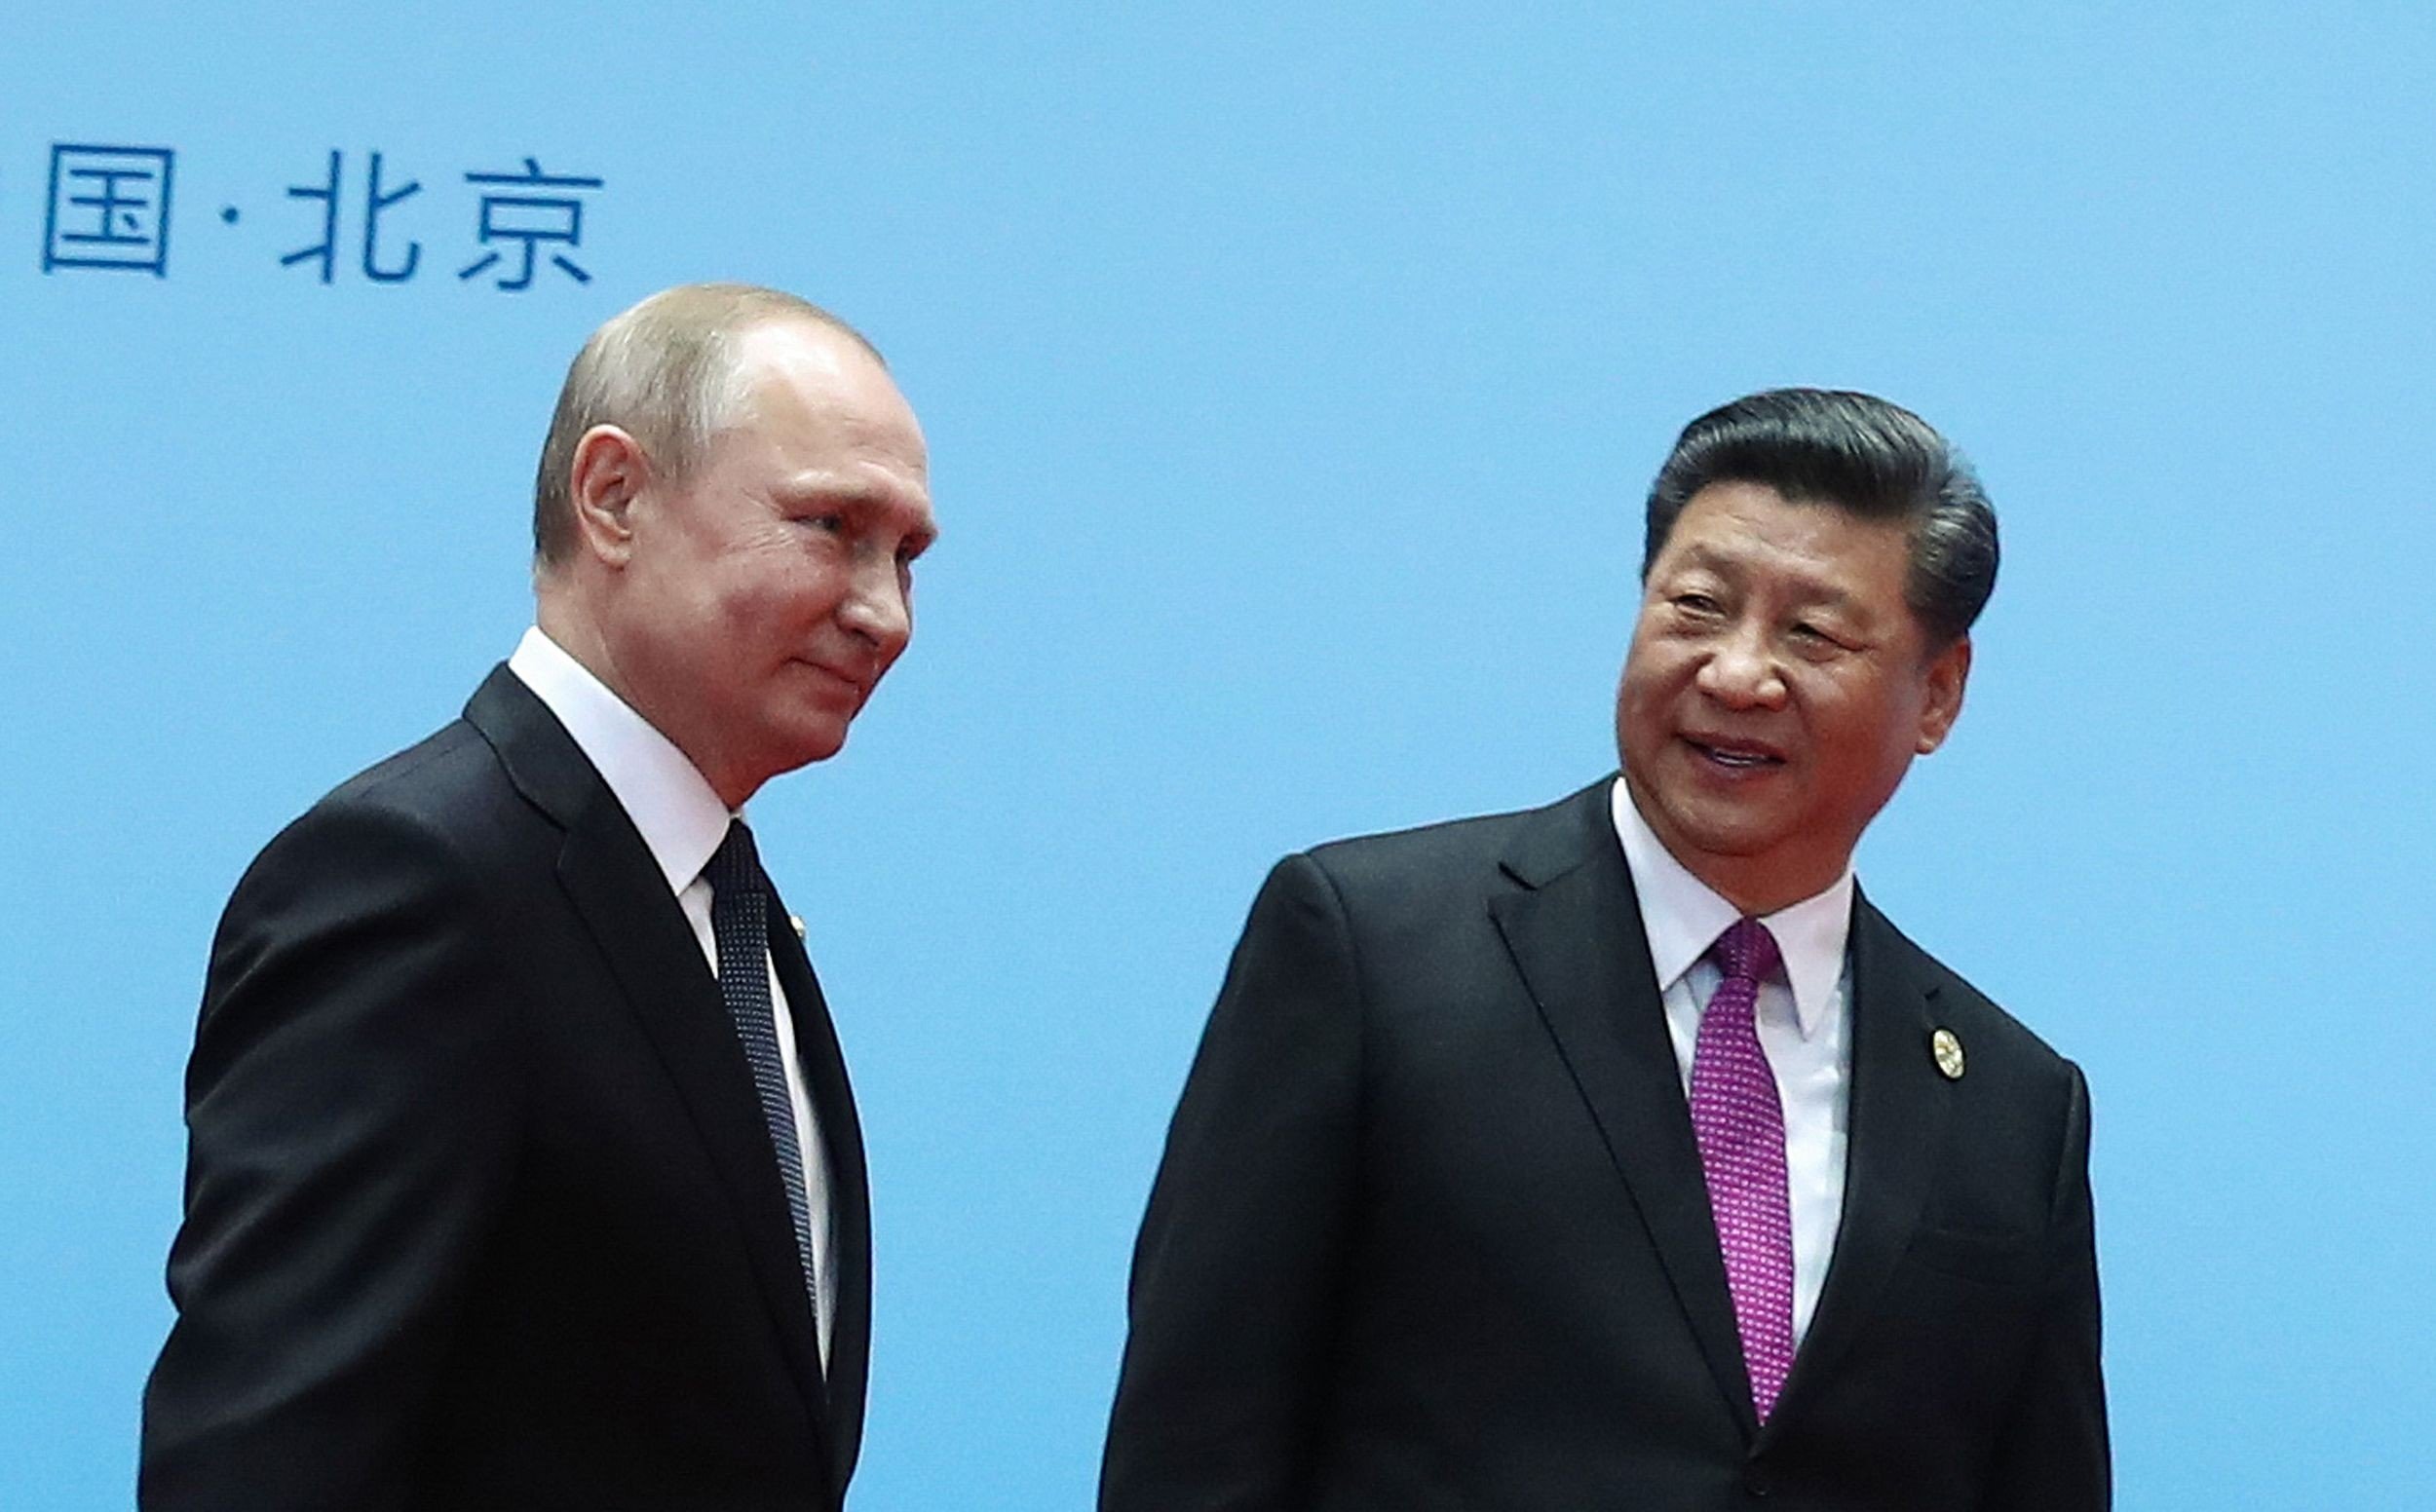 Xi Jinping has met Vladimir Putin more times than any other foreign leader since he took power in 2013. Photo: AFP